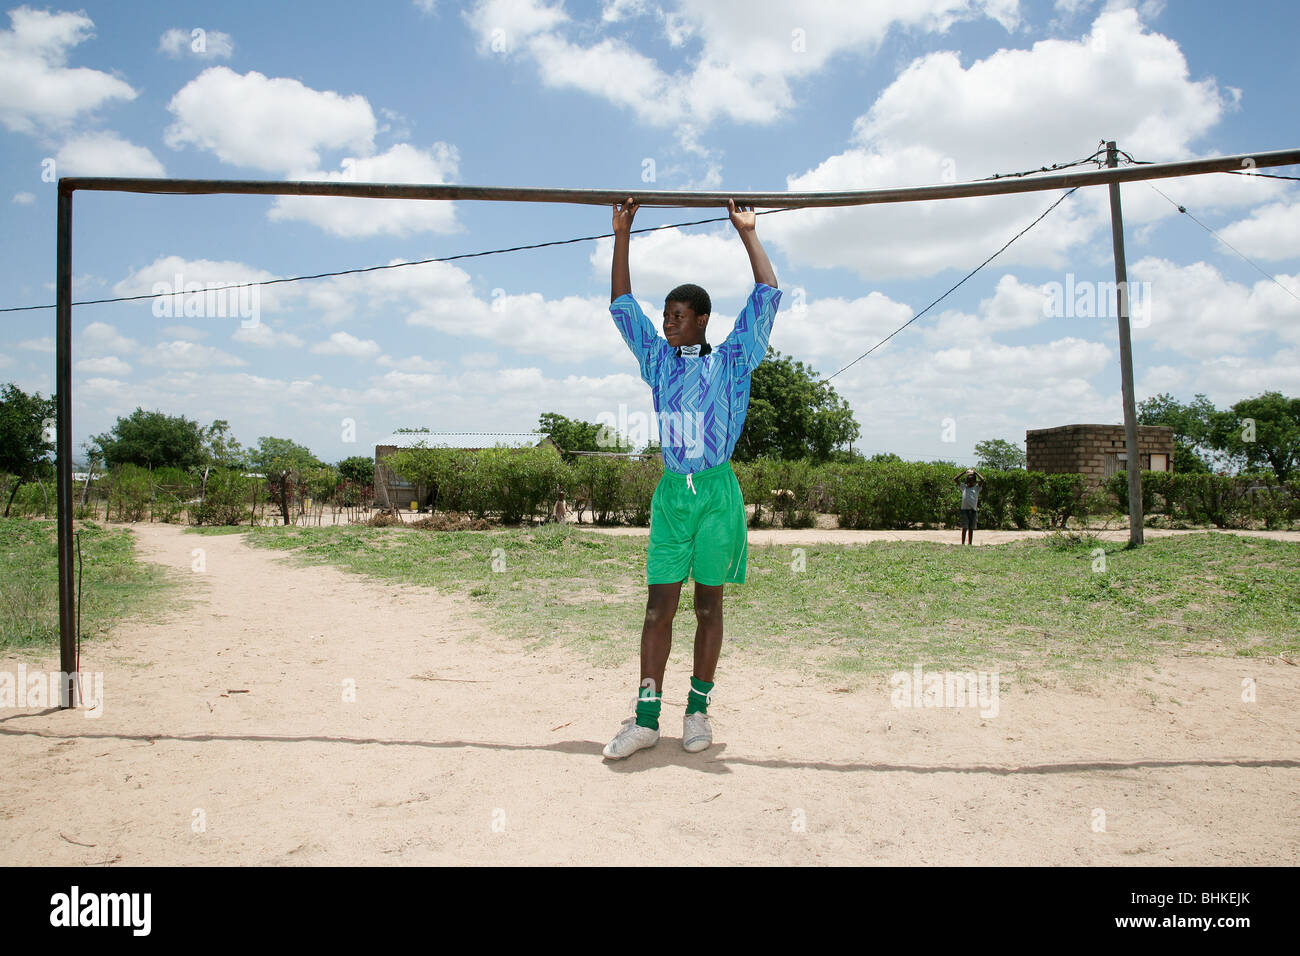 A young, black South African boy standing in a soccer goal mouth with his hands touching the cross bar on the school football Stock Photo